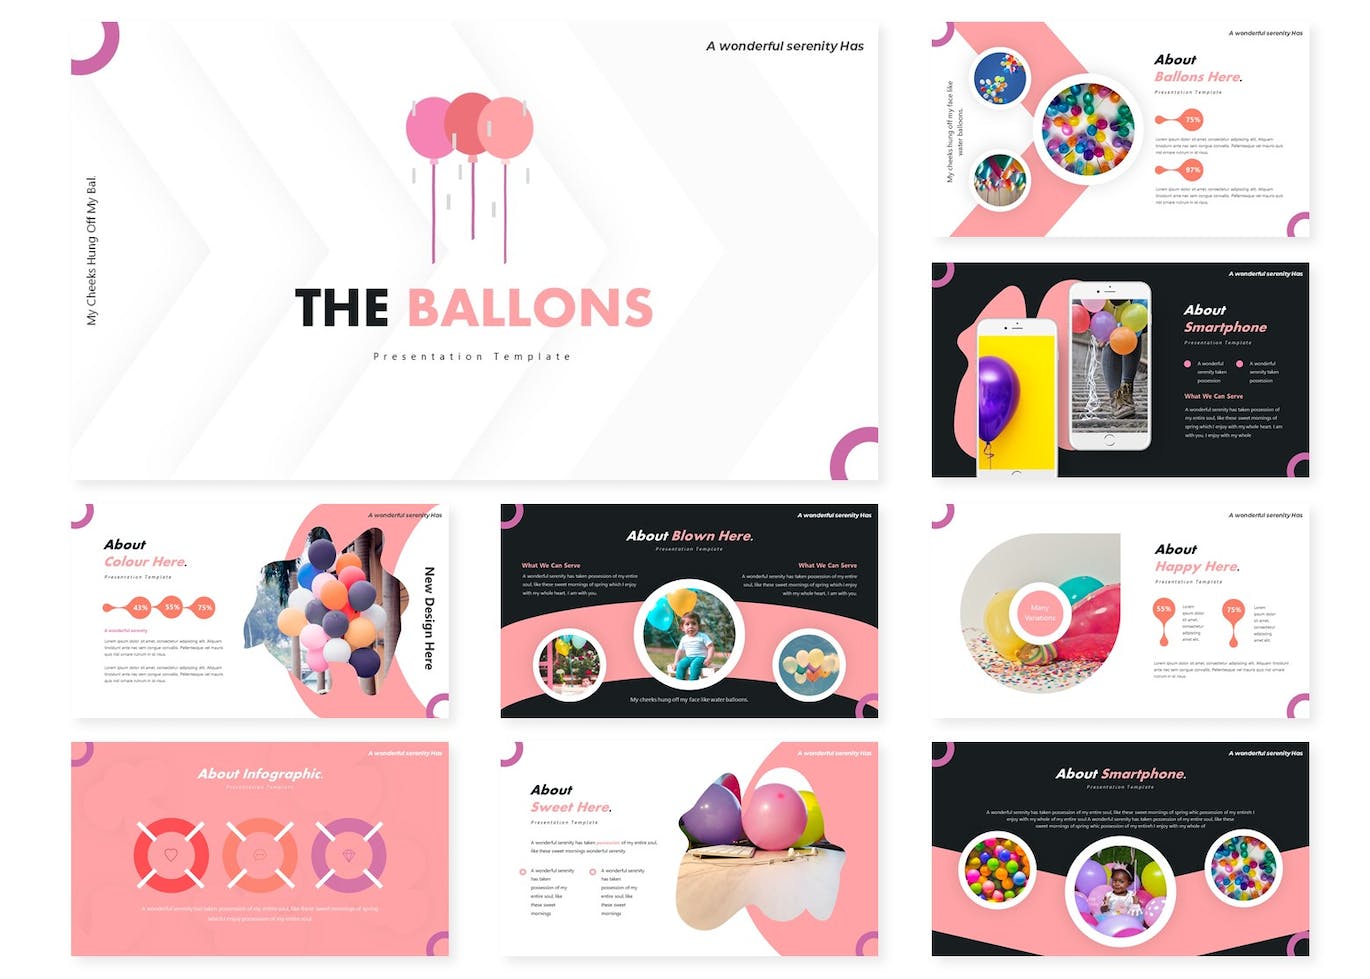 Collection of images of cute balloons presentation template slides.